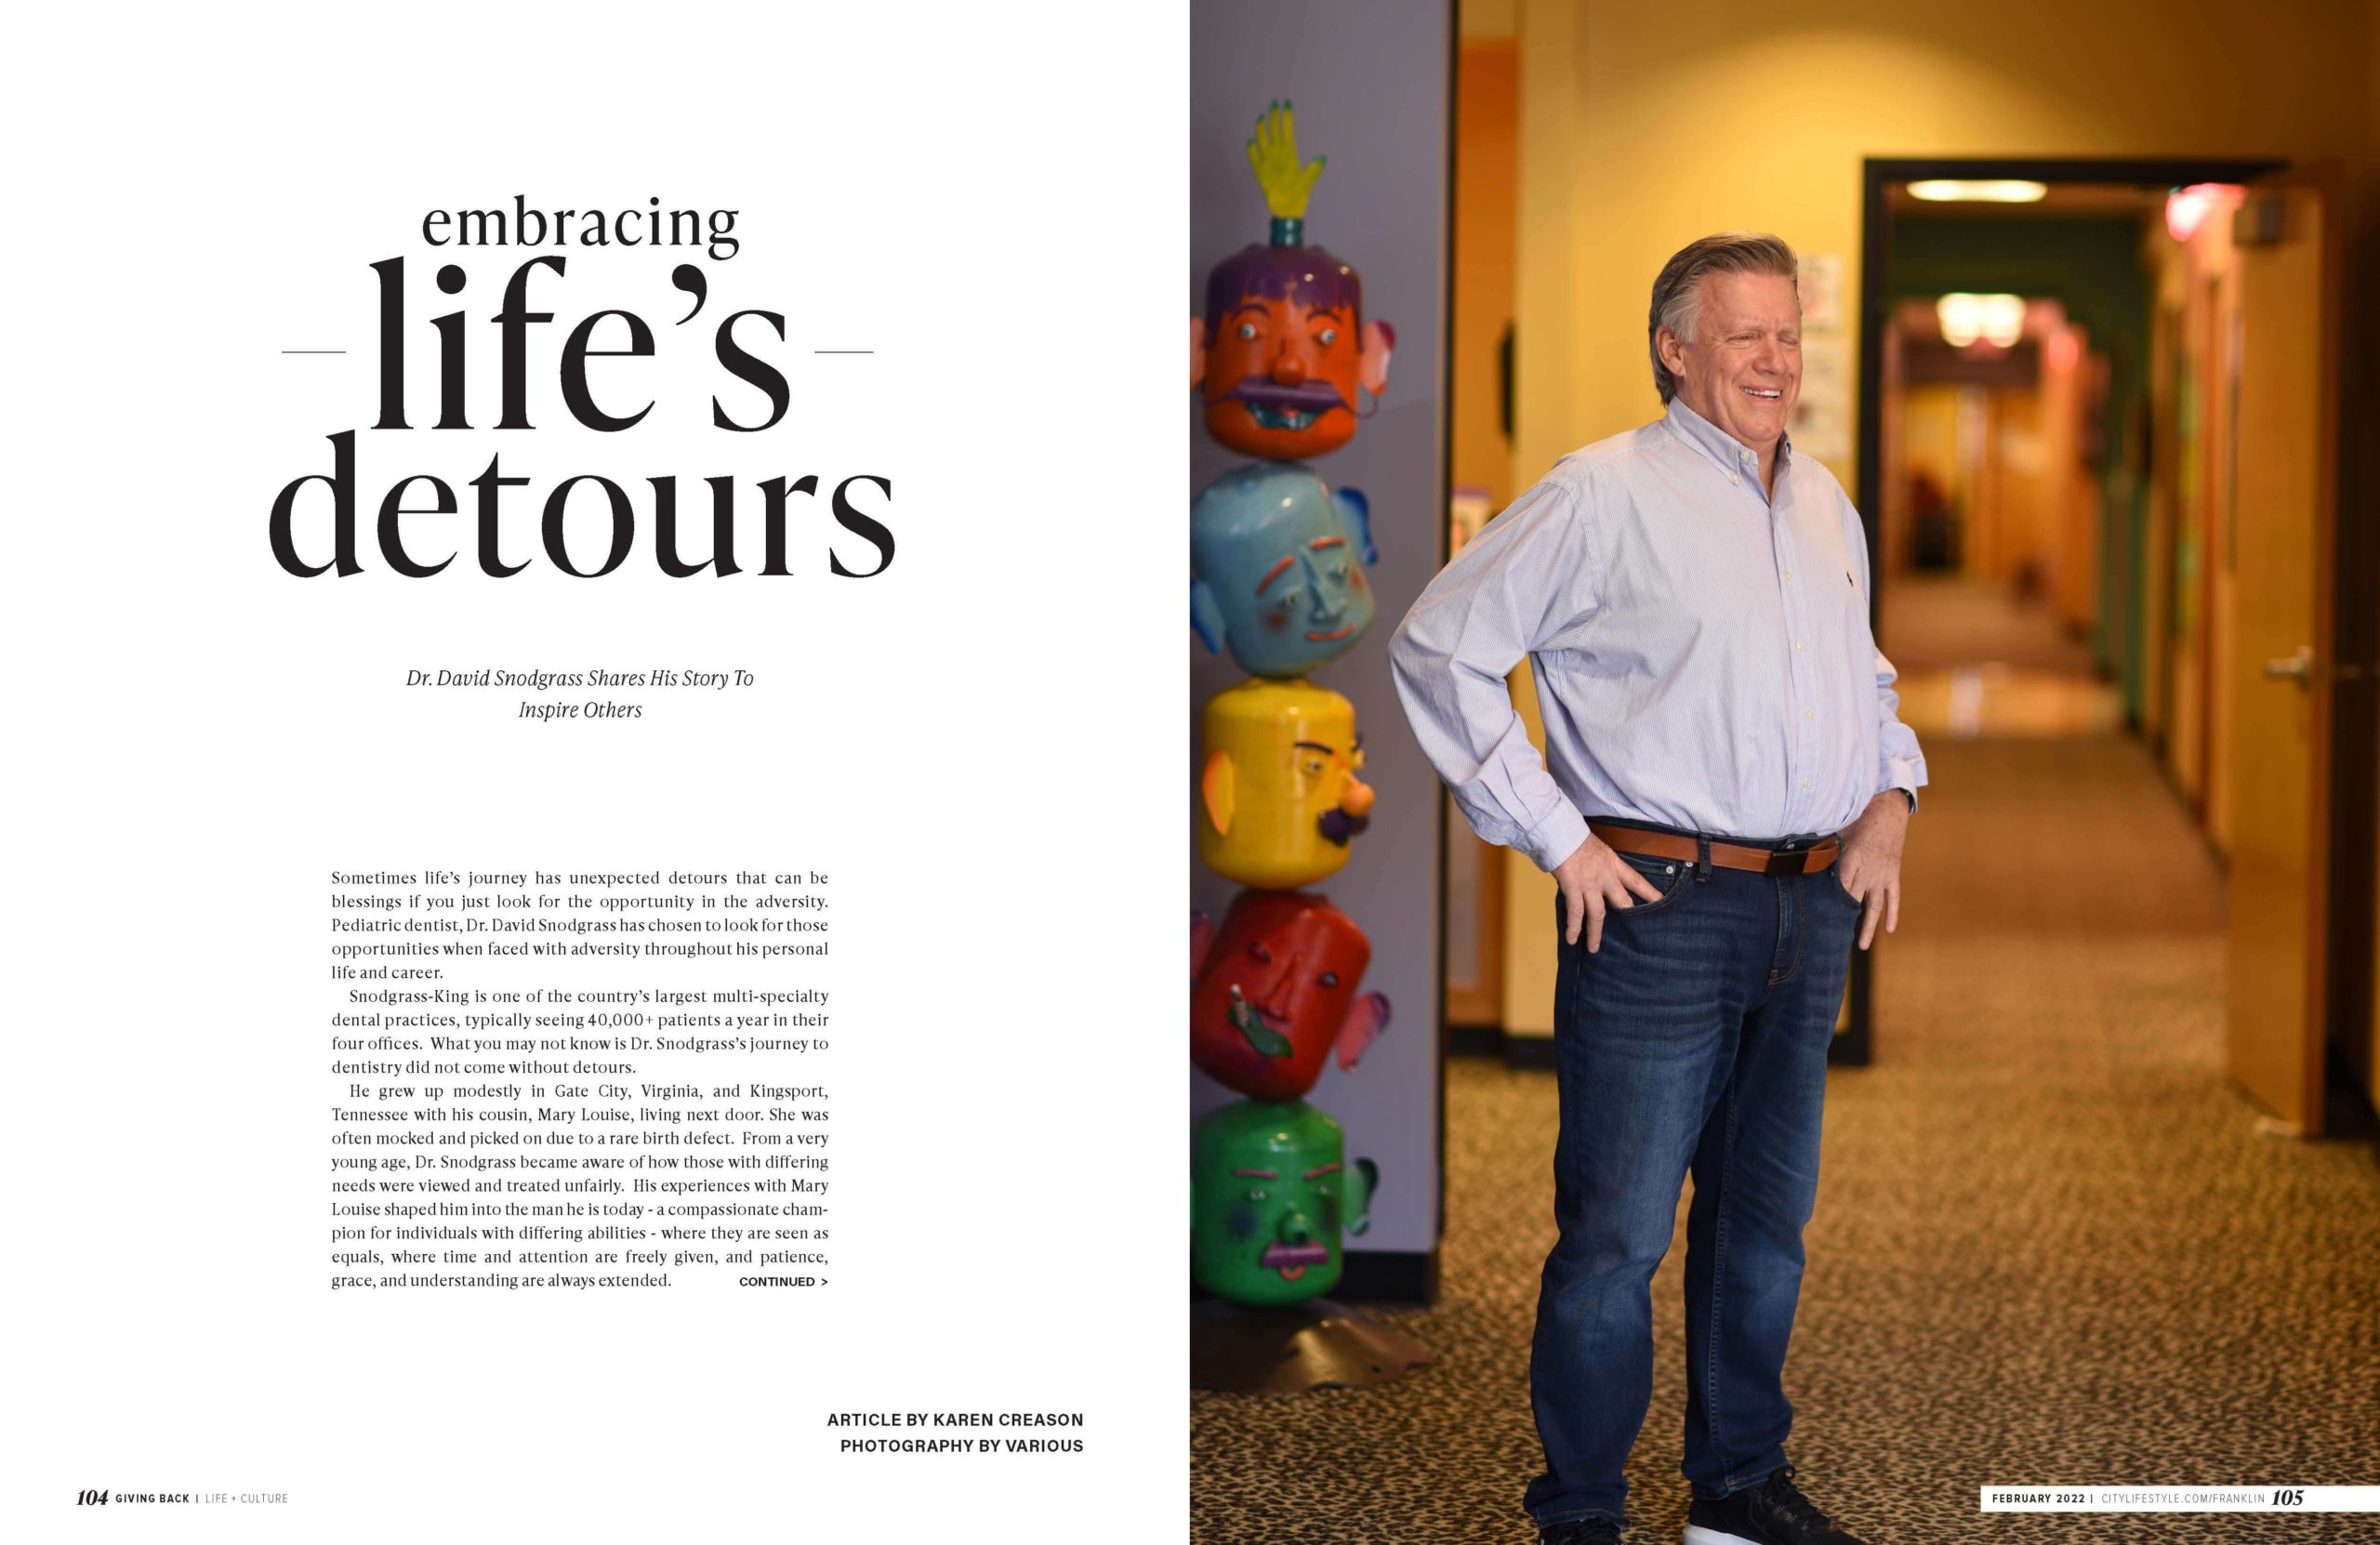 Dr. Snodgrass featured in Life's Detours magazine article.